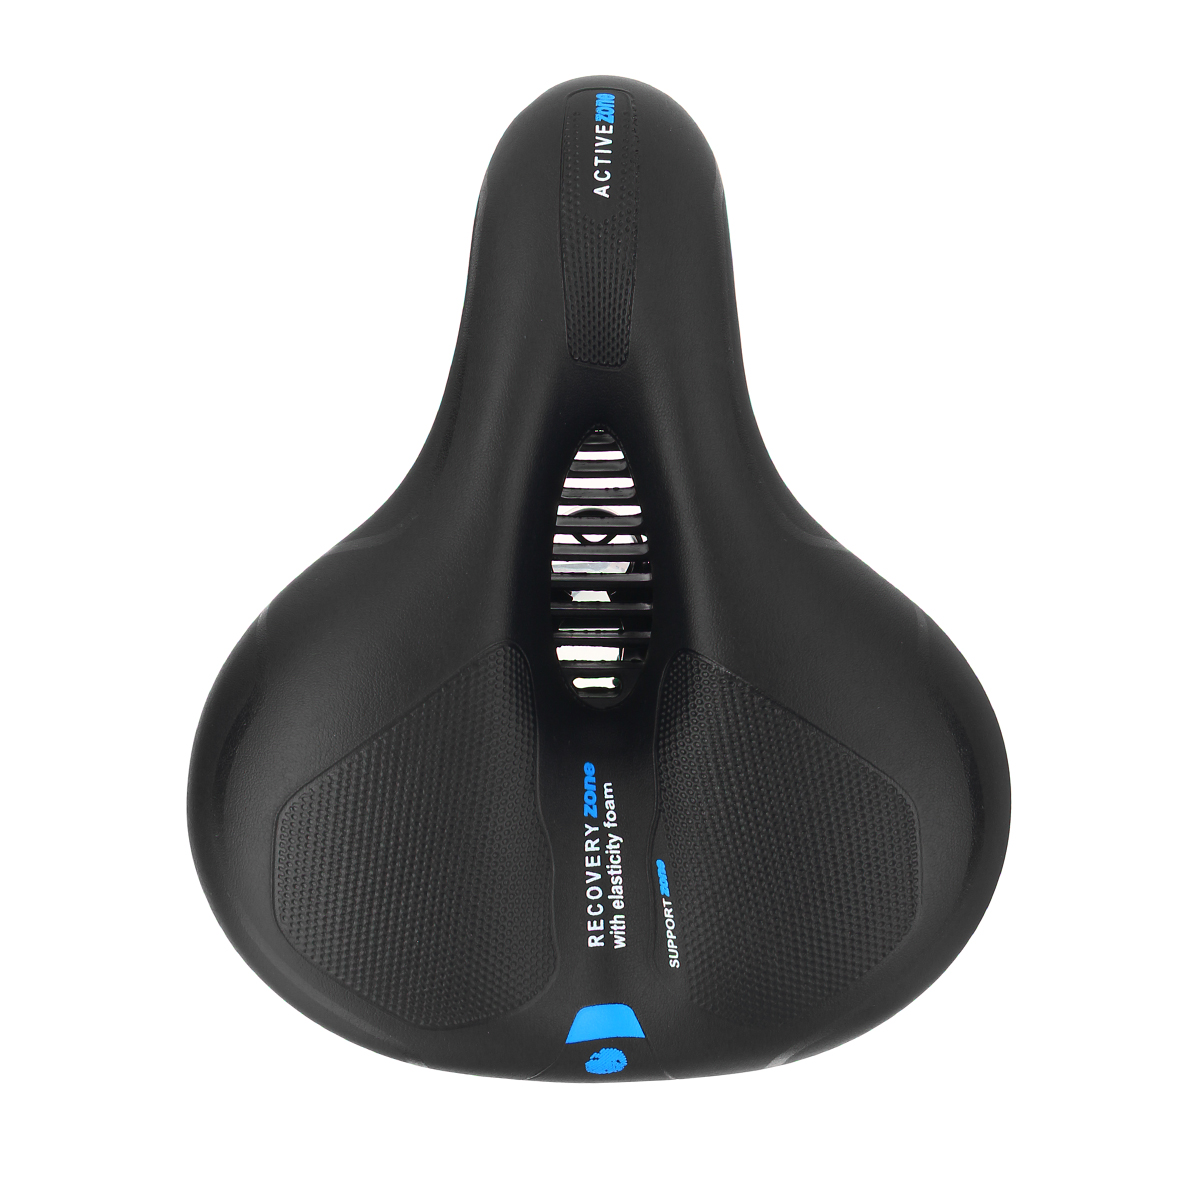 Widen Comfortable Bicycle Seat Soft Bike Saddle With Shock Absorber Ball Mountain Bike Seat Accessories